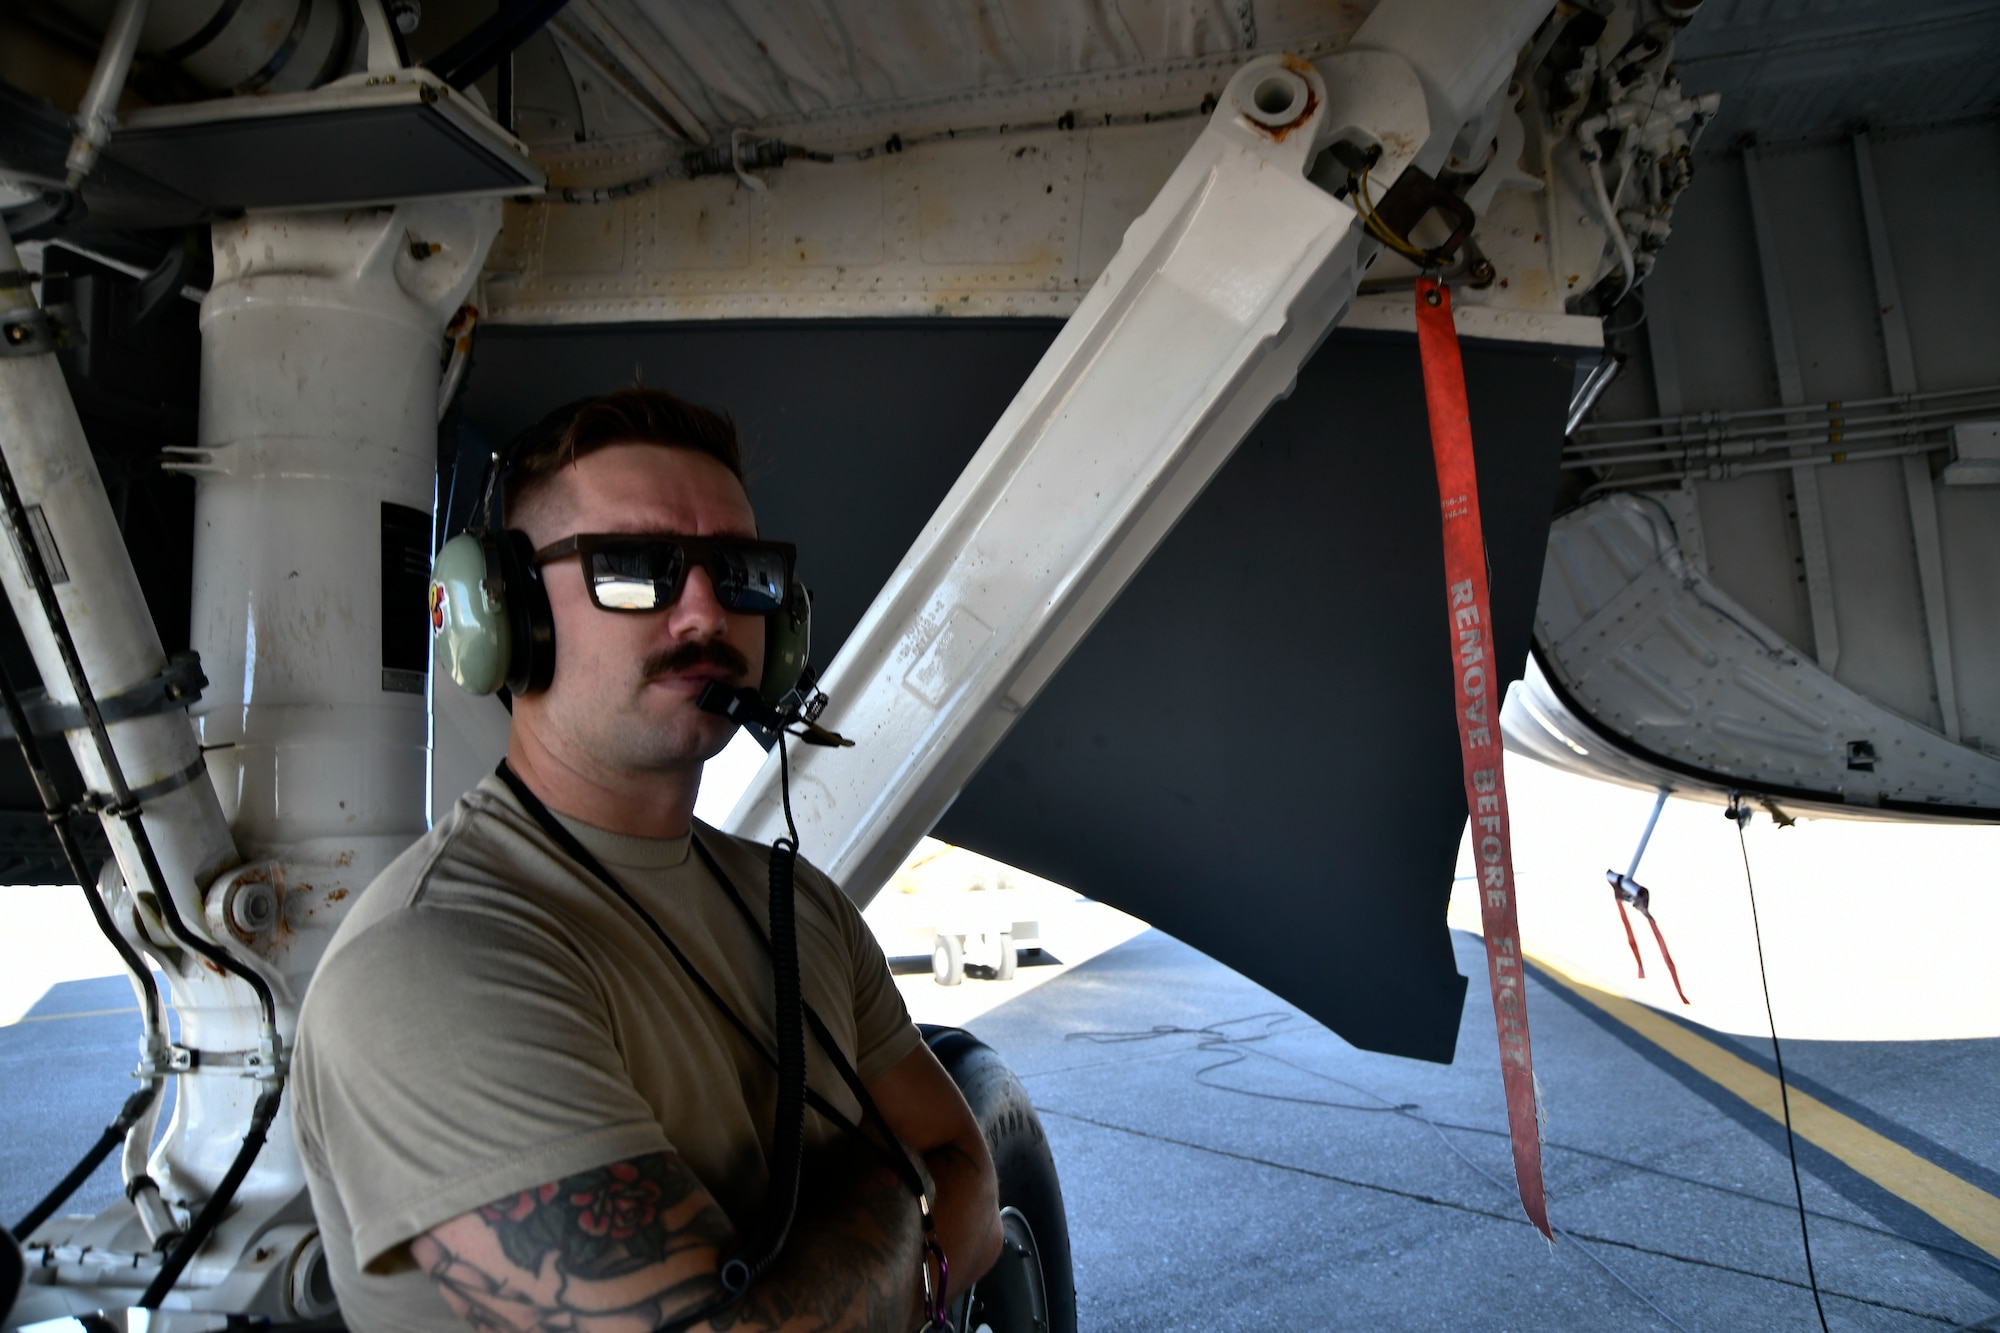 Staff Sgt. Brandon Buhler, 940th Aircraft Maintenance Squadron crew chief, watches the fuel gauge of a KC-135 Stratotanker during a refueling exercise September 6, 2019 at Beale Air Force Base, California. (U.S. Air Force photo by Tech. Sgt. Alexandre Montes)